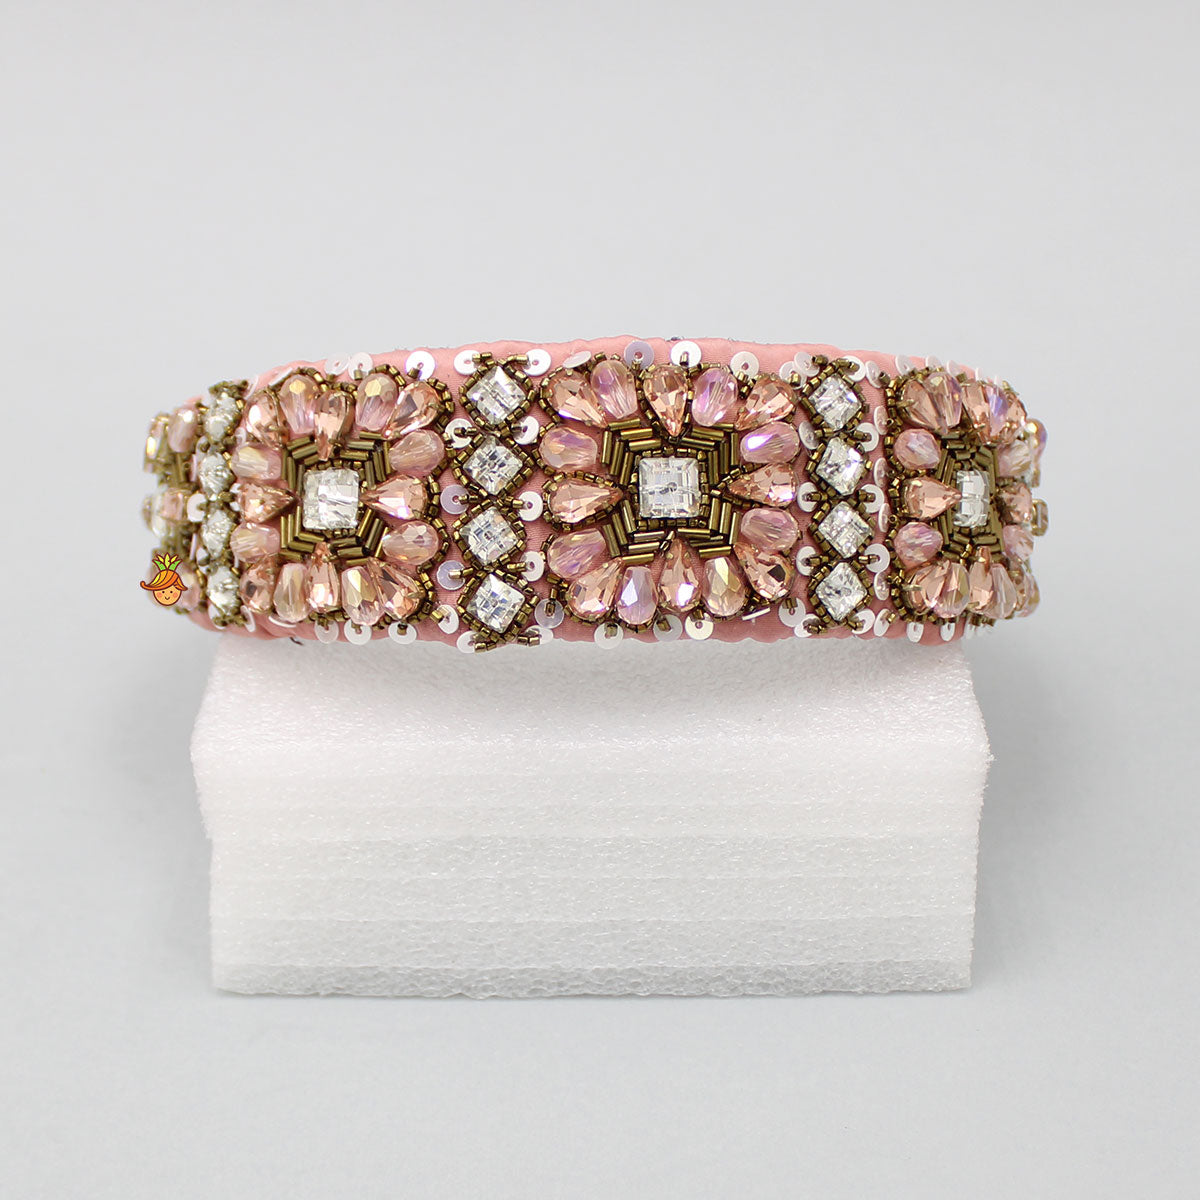 Beautiful Stones And Cut Dana Embellished Fancy Coral Pink Hair Band